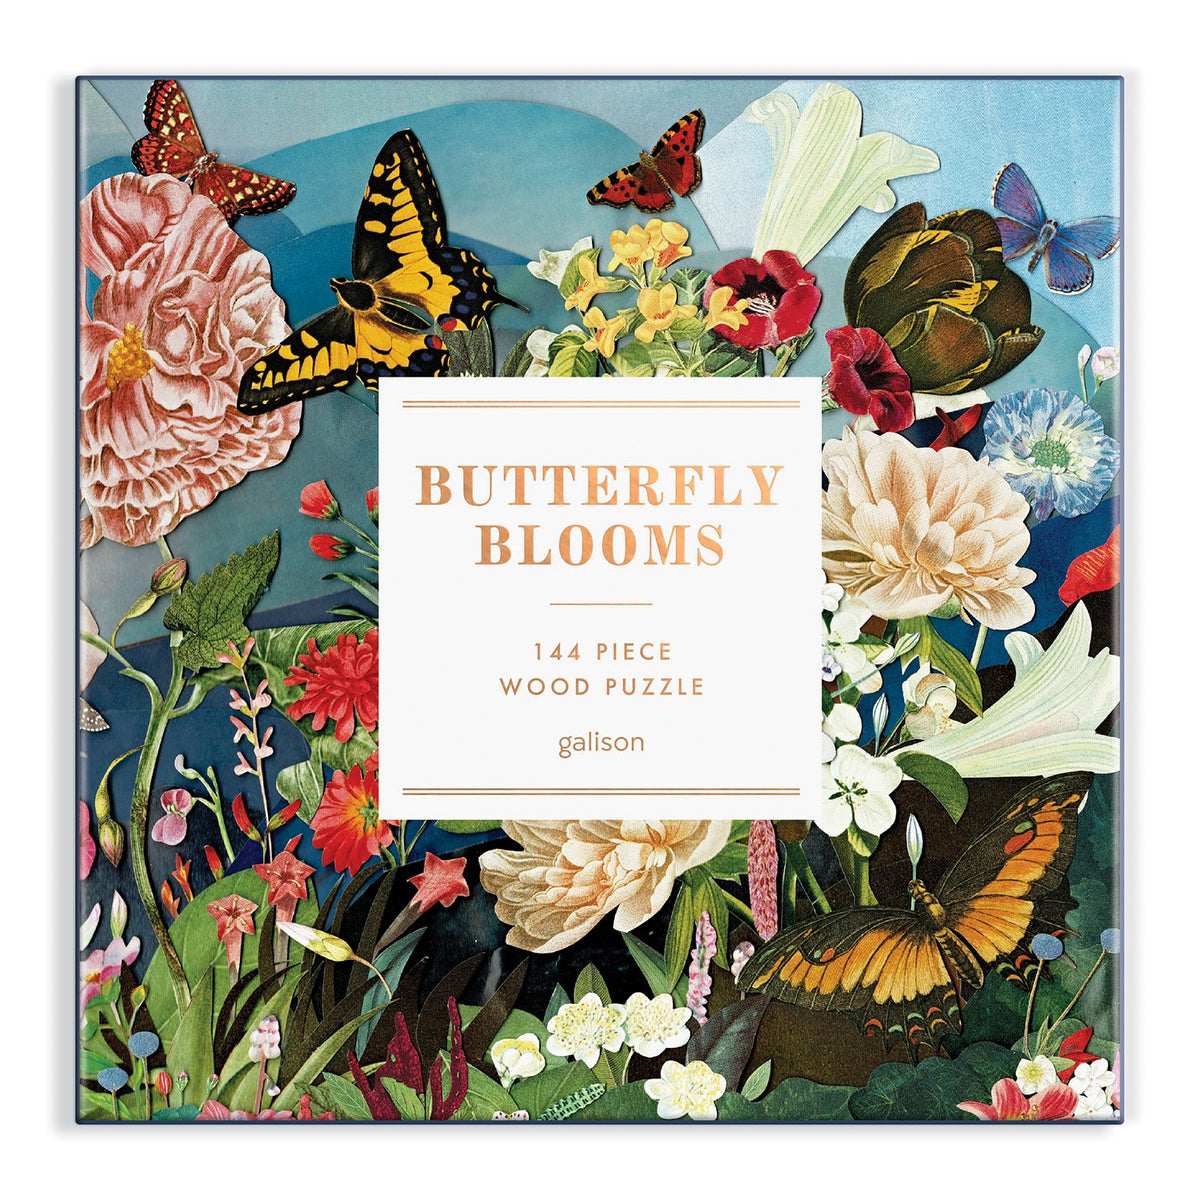 Butterfly Blooms 144 Piece Wood Jigsaw Puzzle Wooden Puzzles Ben Giles 